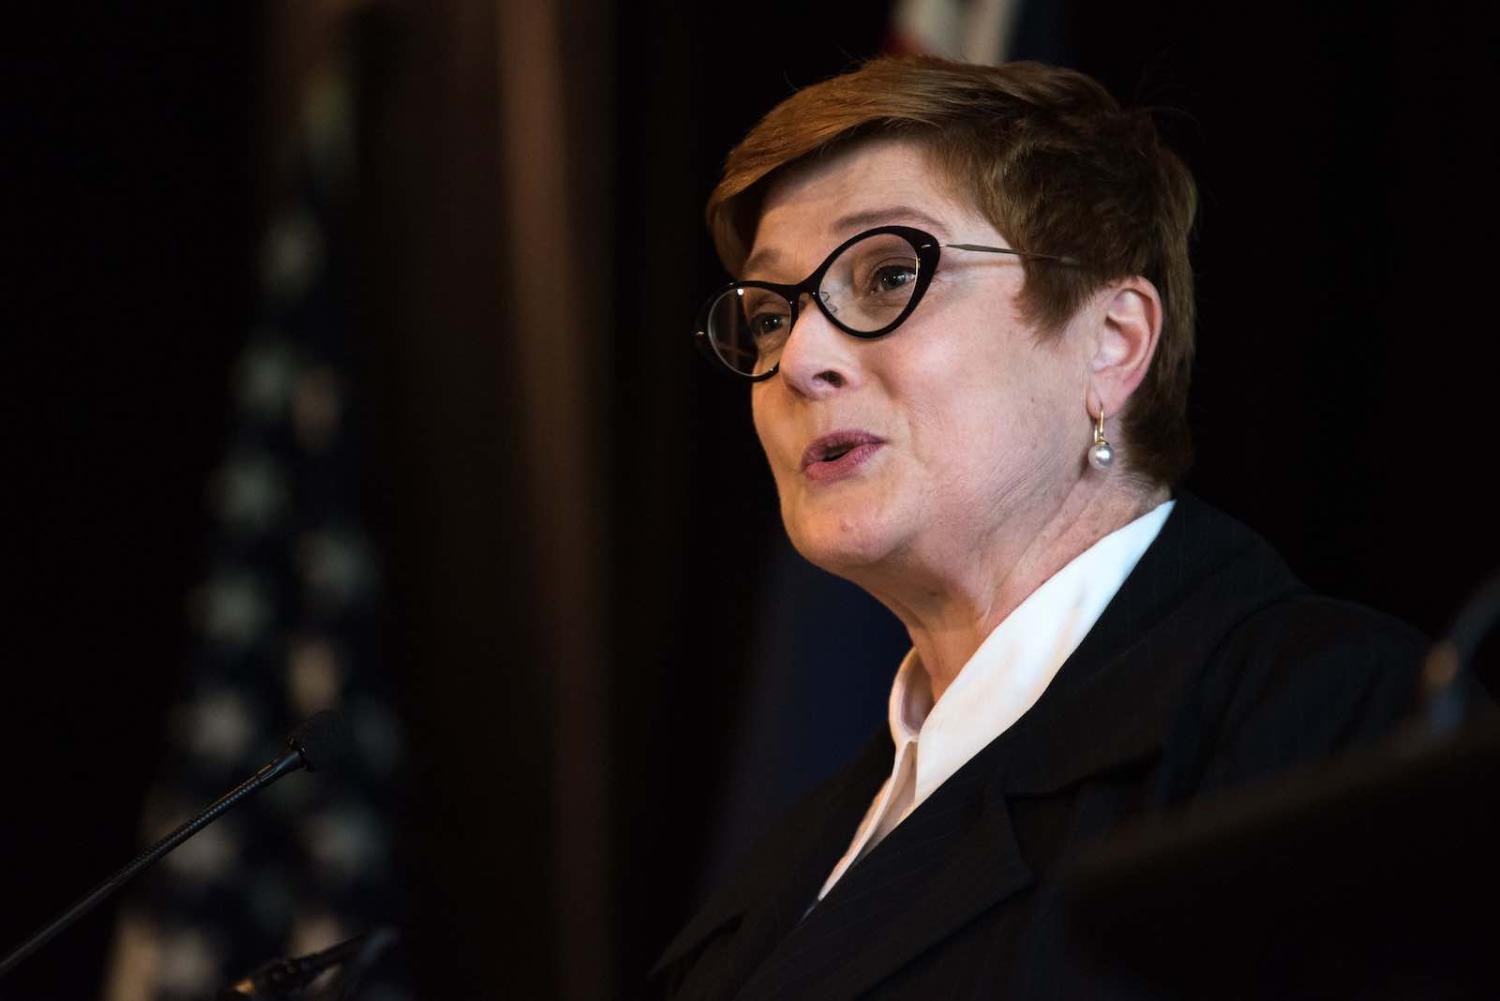 Australian Foreign Minister Marise Payne has warned multilateral institutions are under “unprecedented strain” (US Department of State/Flickr)